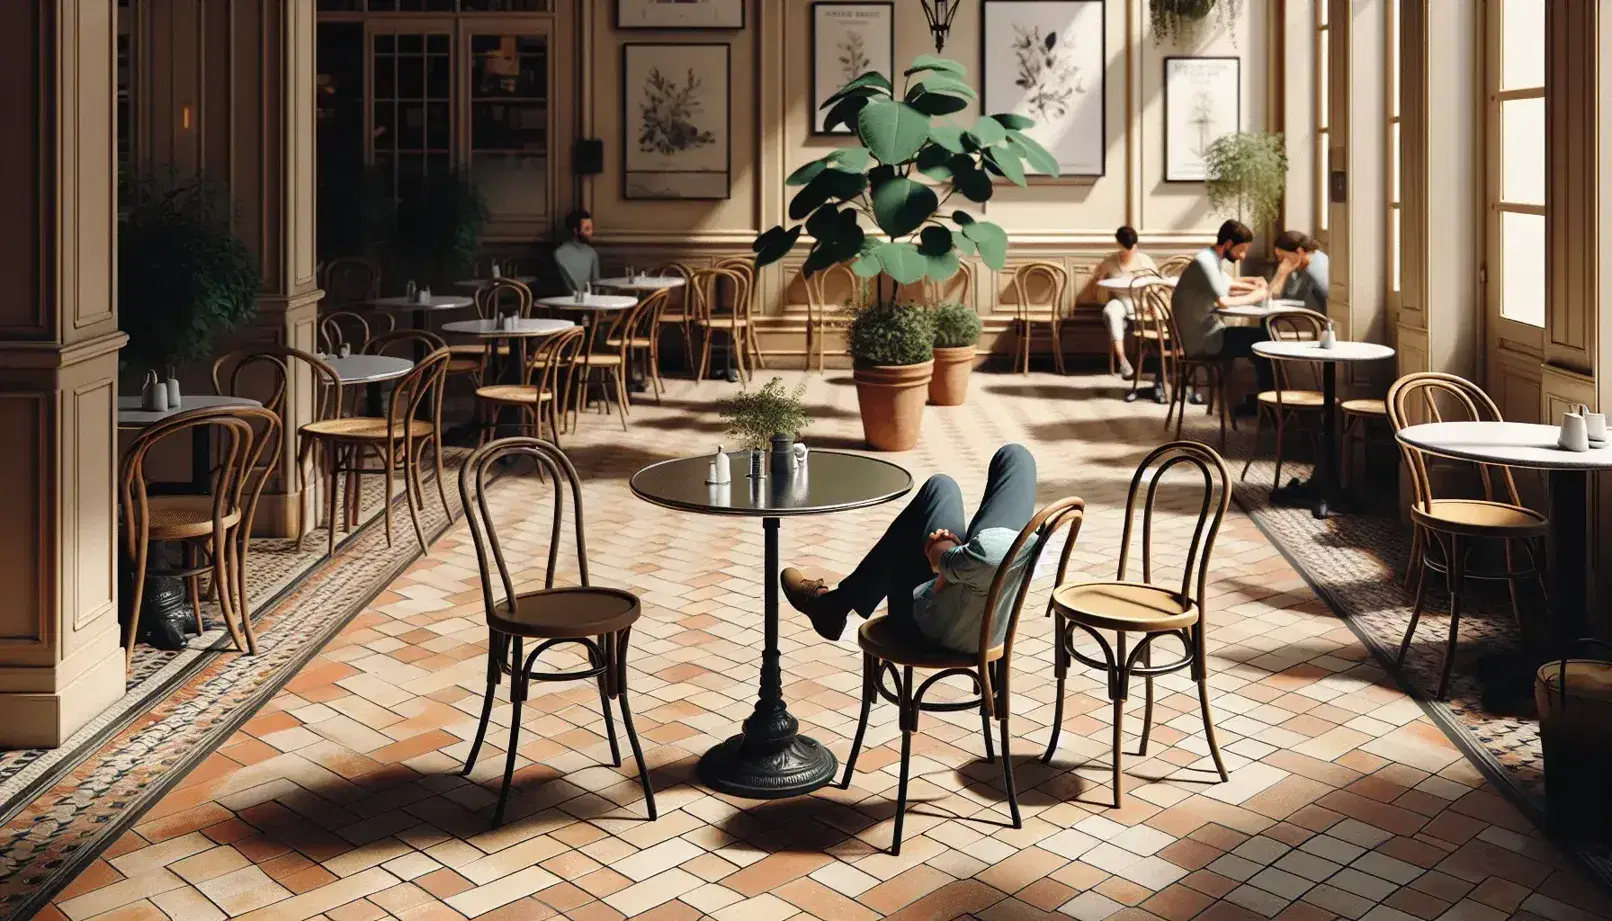 Tranquil French café scene with a person seated at a shiny bistro table, surrounded by wrought-iron chairs and terracotta tiled floor.